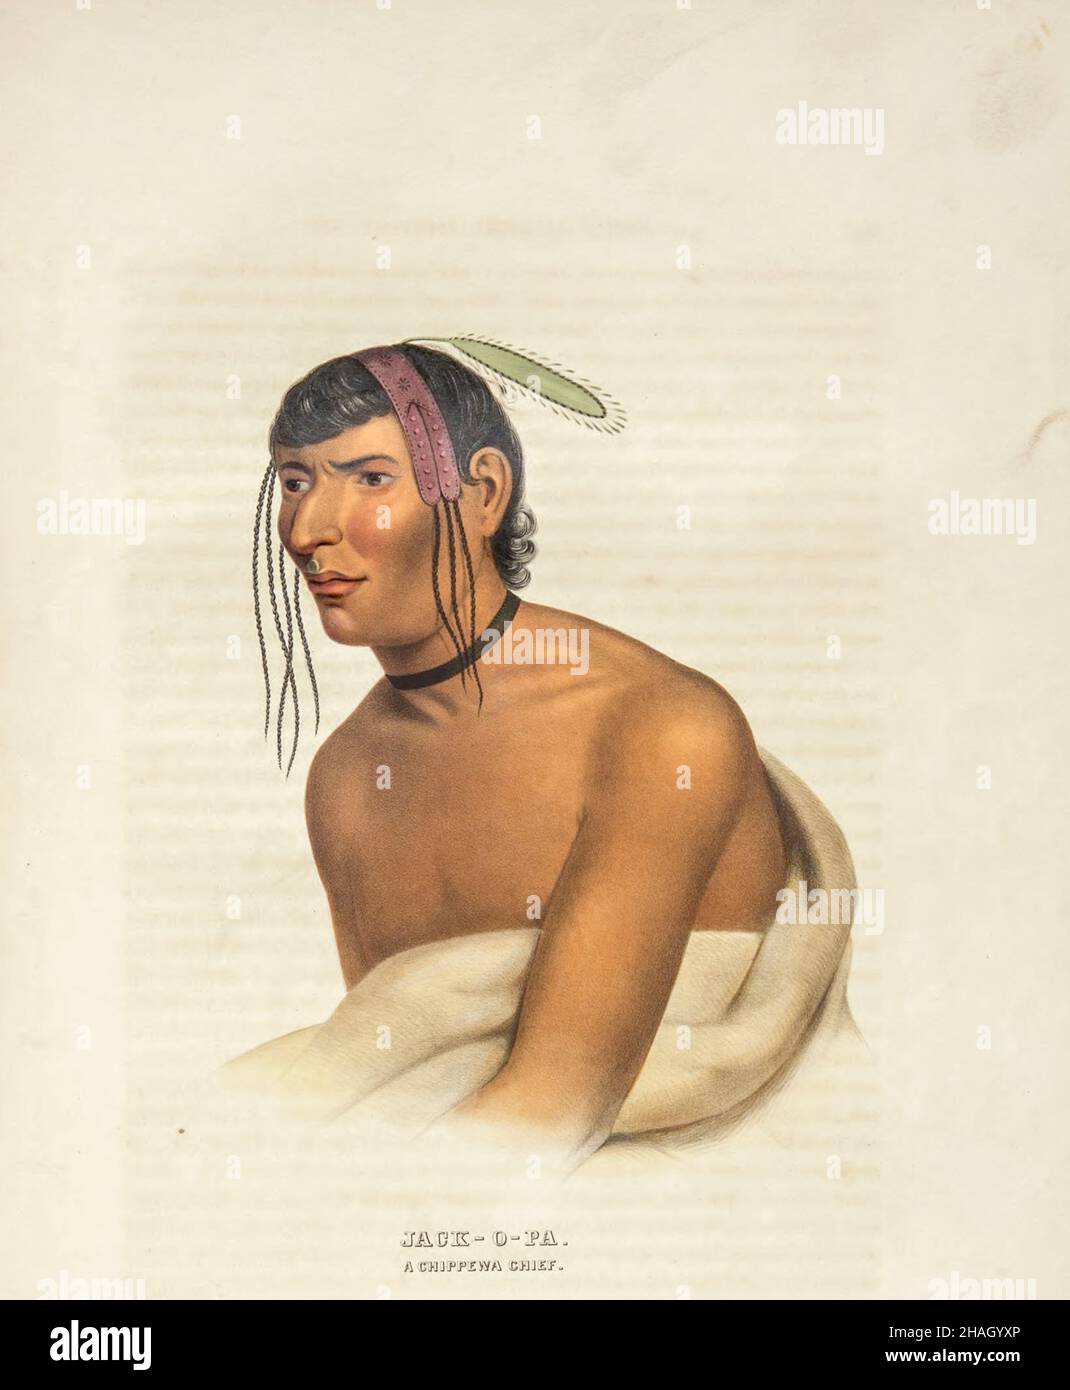 Jack-O-Pa, a Chippewa Chief [Zhaagobe (c.1794), also known as Jack-O-Pa or Shagobai, was a St. Croix Ojibwe chief of the Snake River band. He signed several Chippewa treaties with the United States, including the 1825 Treaty of Prairie du Chien, the 1826 Treaty of Fond du Lac, the 1837 Treaty of St. Peters, and the 1842 Treaty of La Pointe. In 1836, geographer Joseph Nicollet had an Ojibwe guide he called Chagobay (or 'Little Six'), but historians are uncertain as to whether they were the same person]. from the book ' History of the Indian Tribes of North America with biographical sketches and Stock Photo